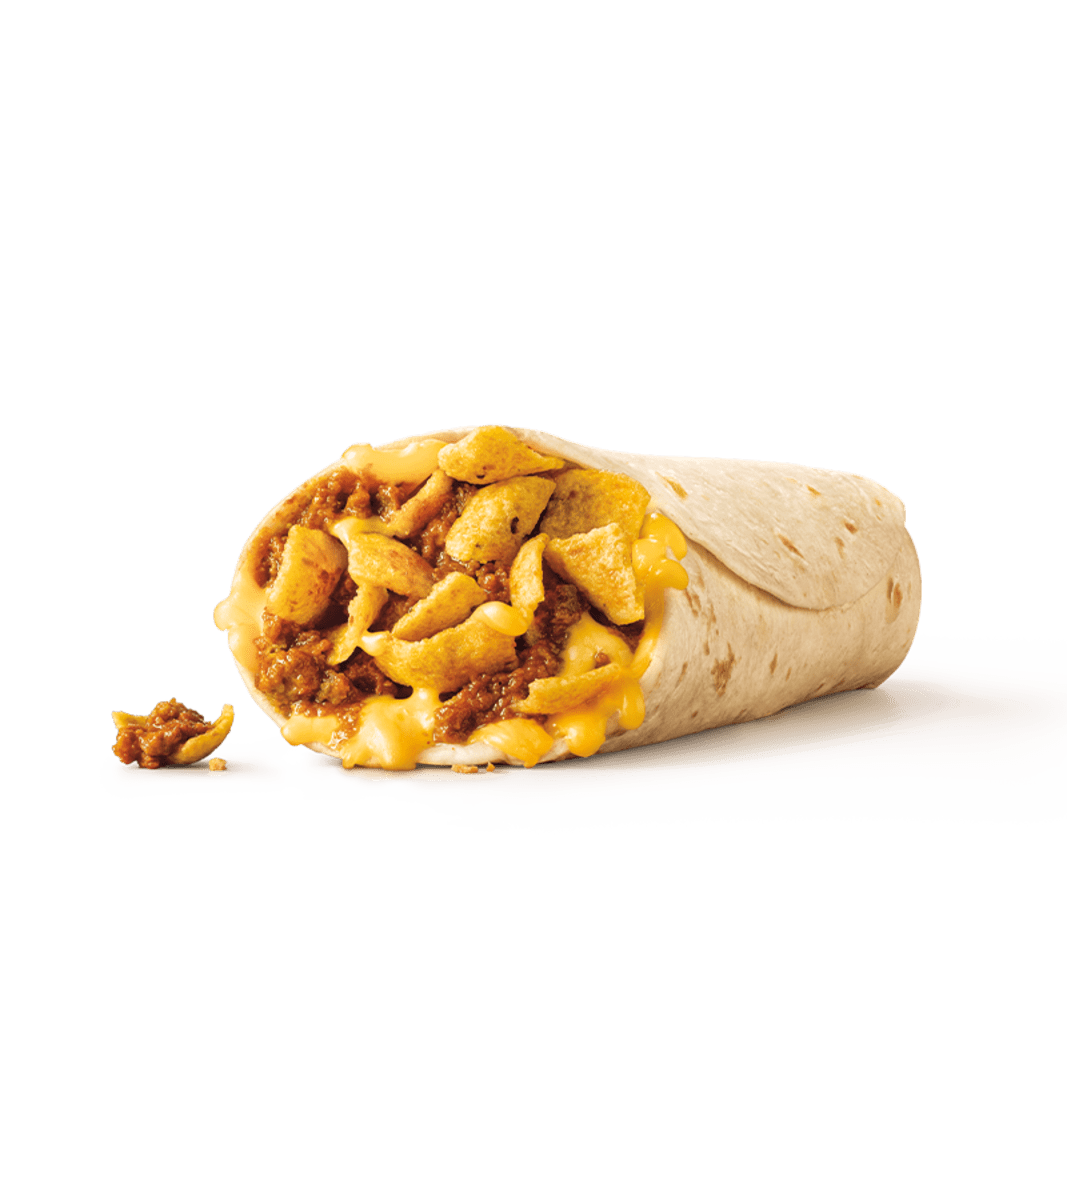 Sonic Fritos Chili Cheese Wrap Nutrition Facts